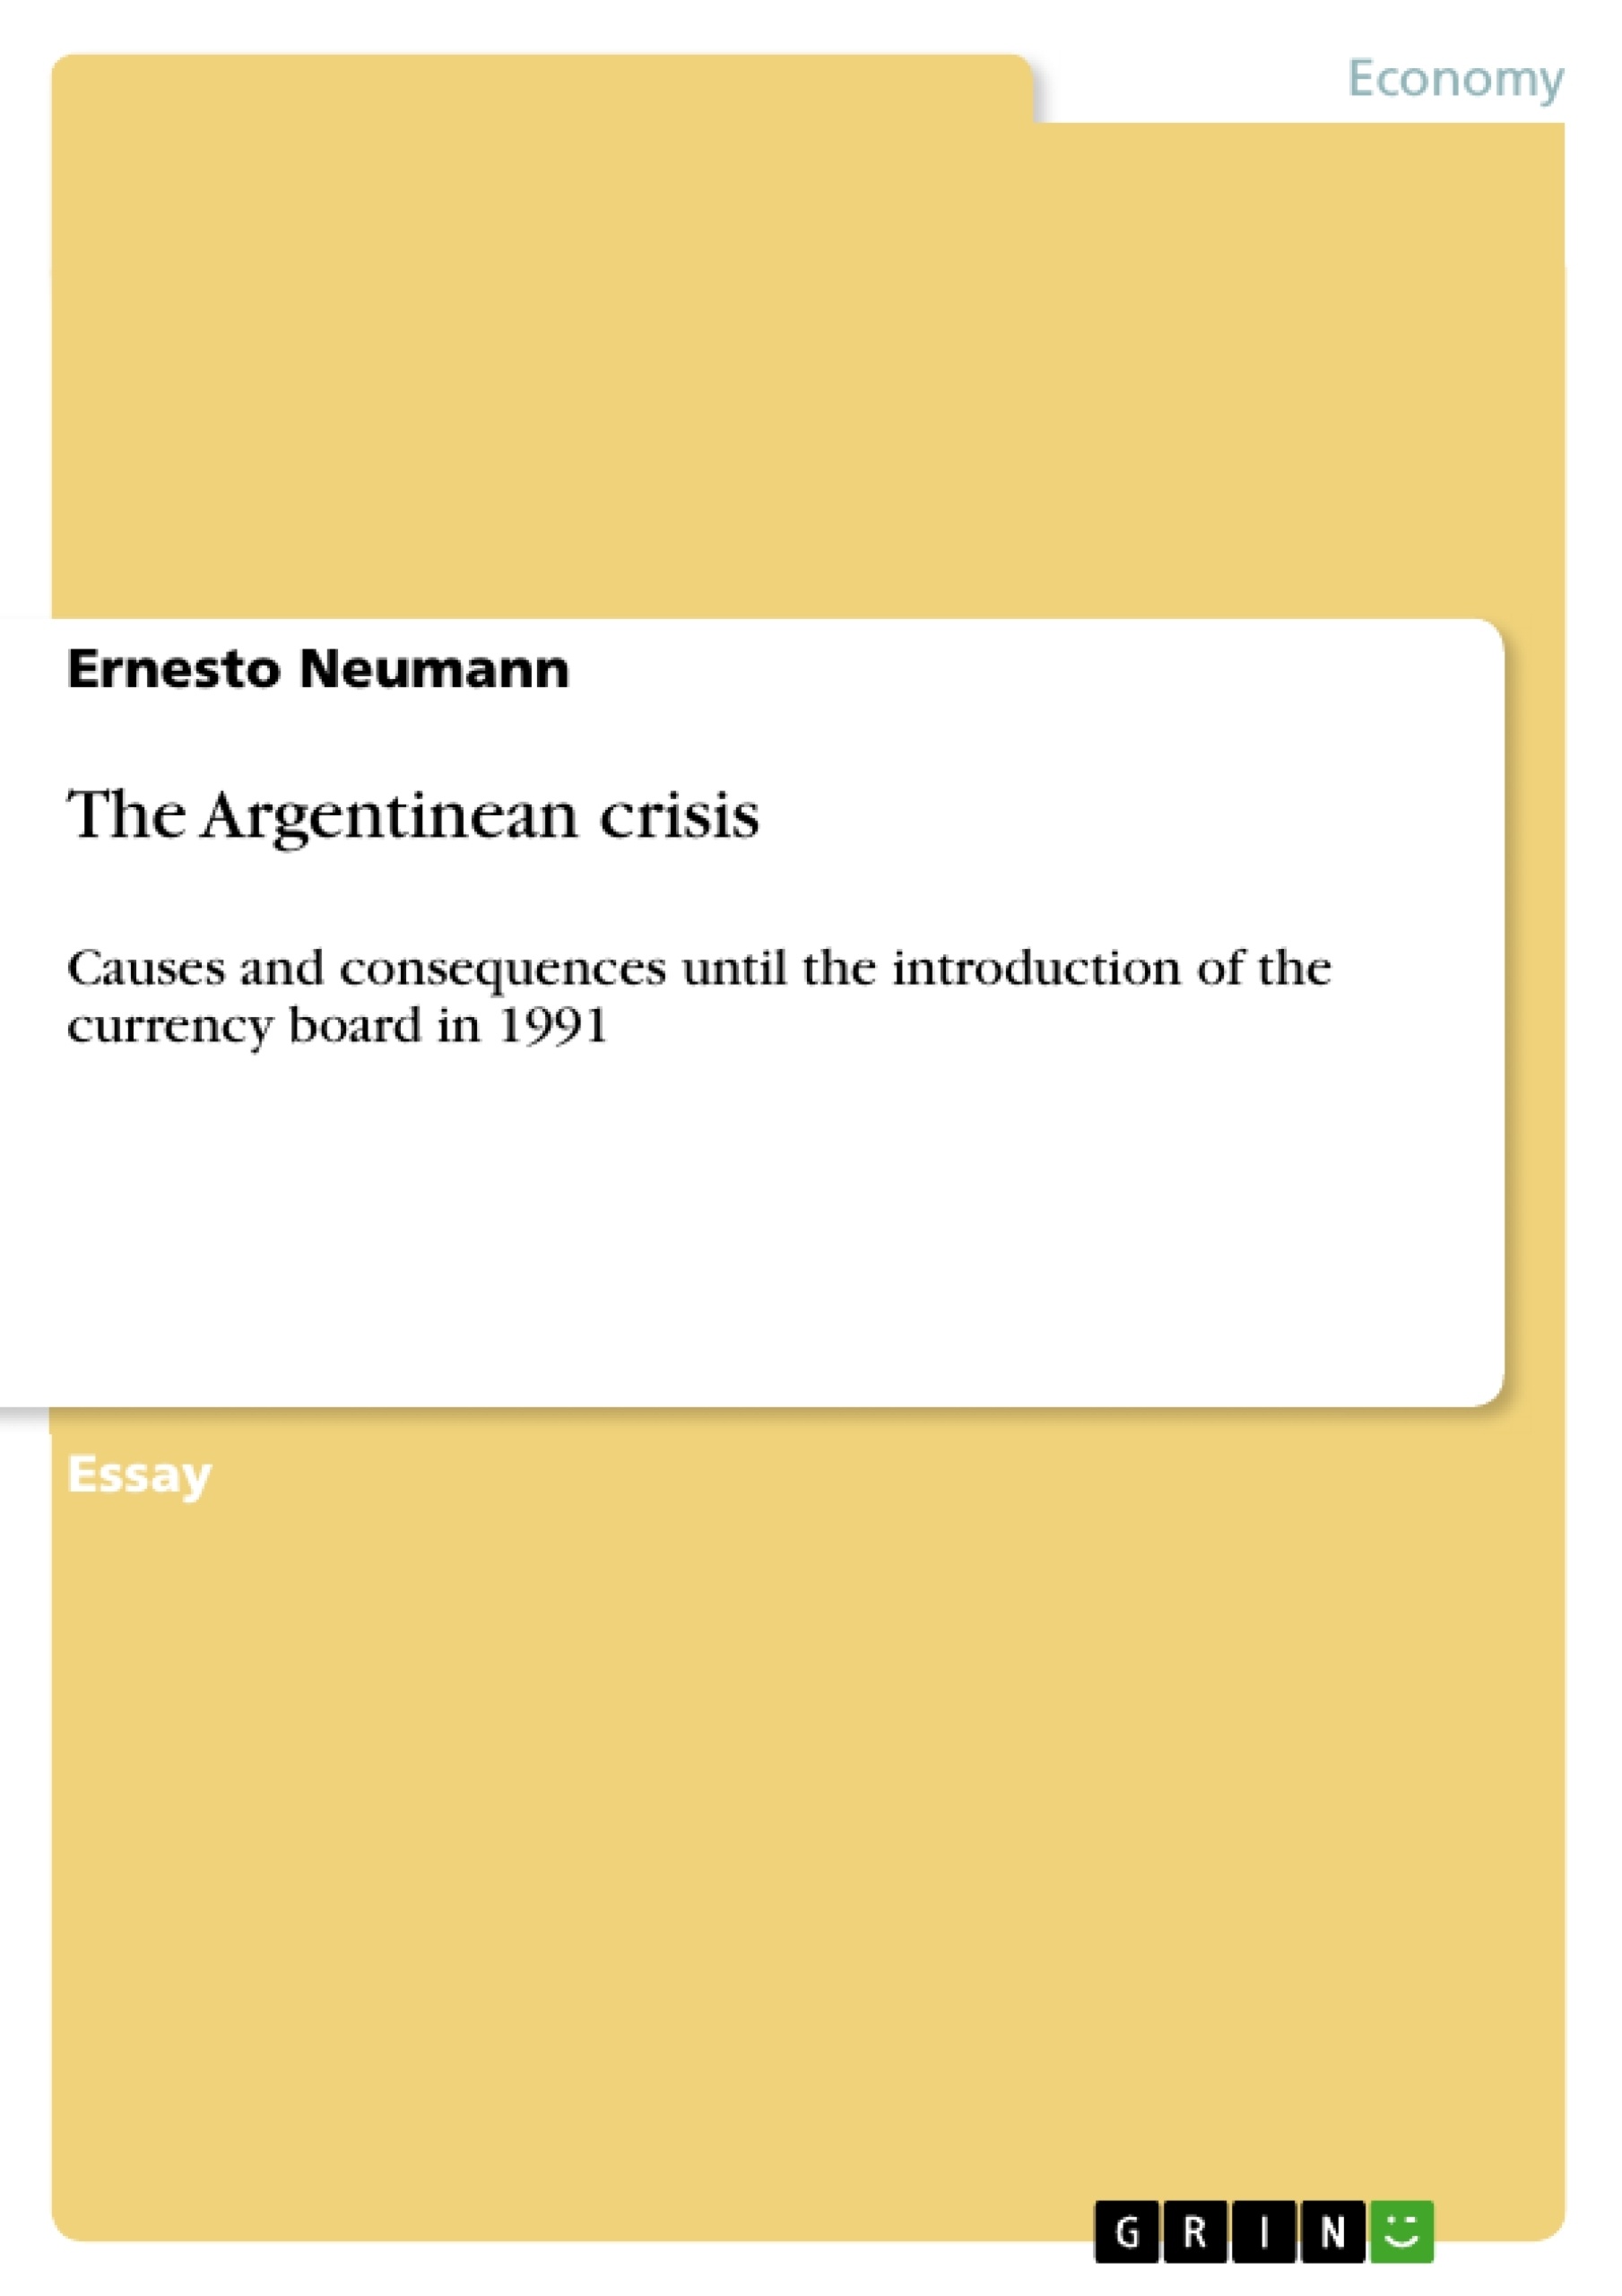 Title: The Argentinean crisis